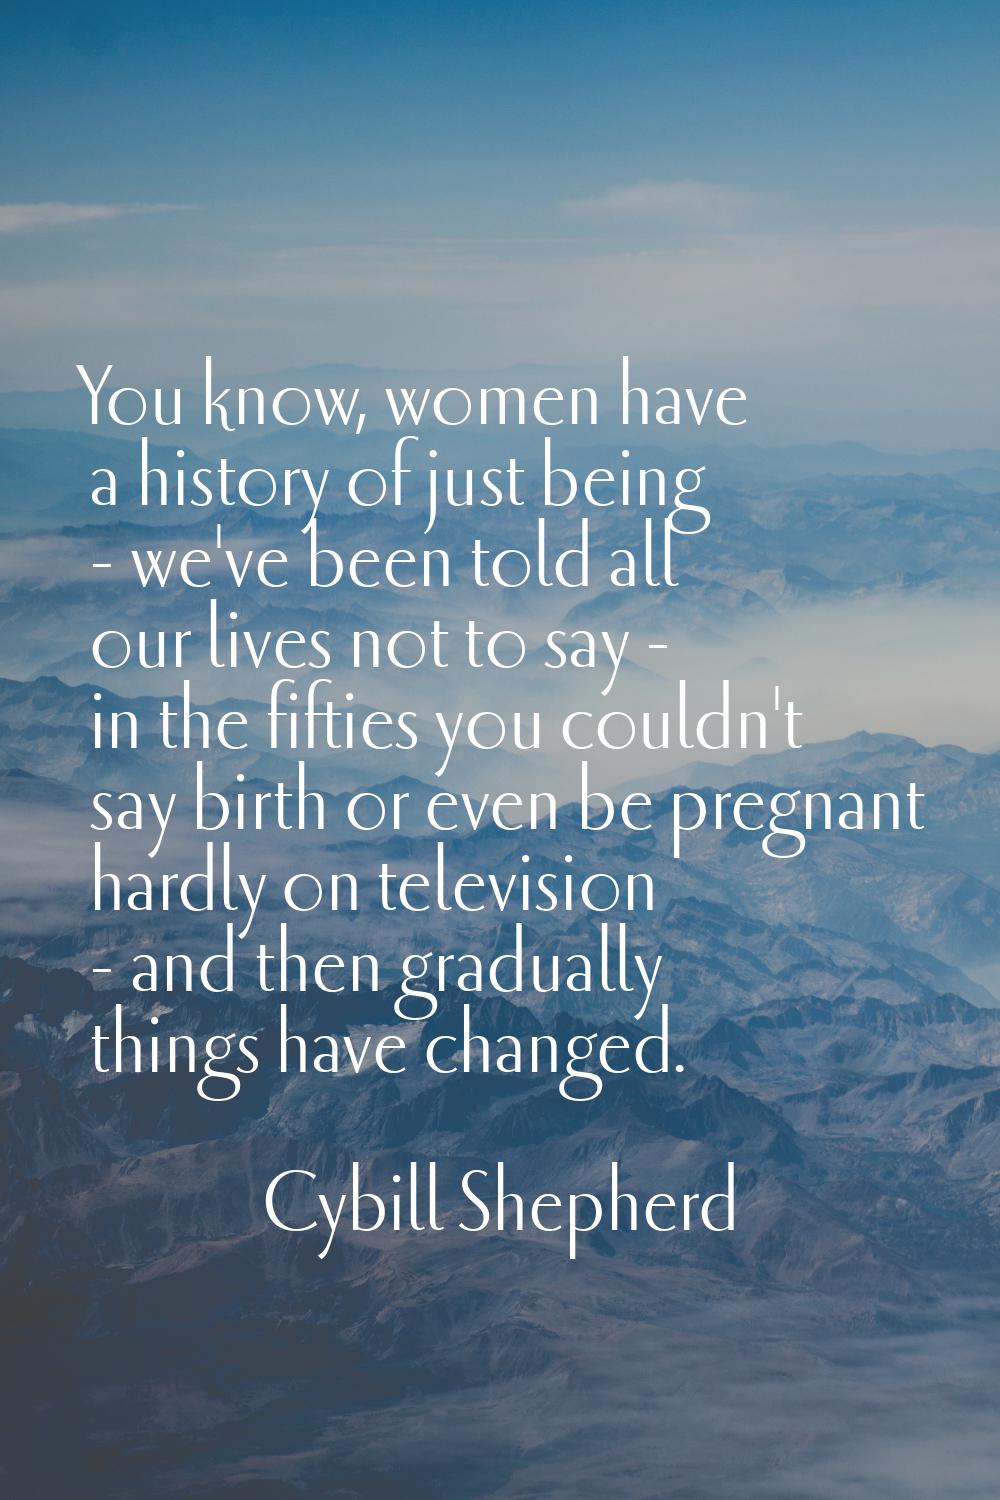 You know, women have a history of just being - we've been told all our lives not to say - in the fi